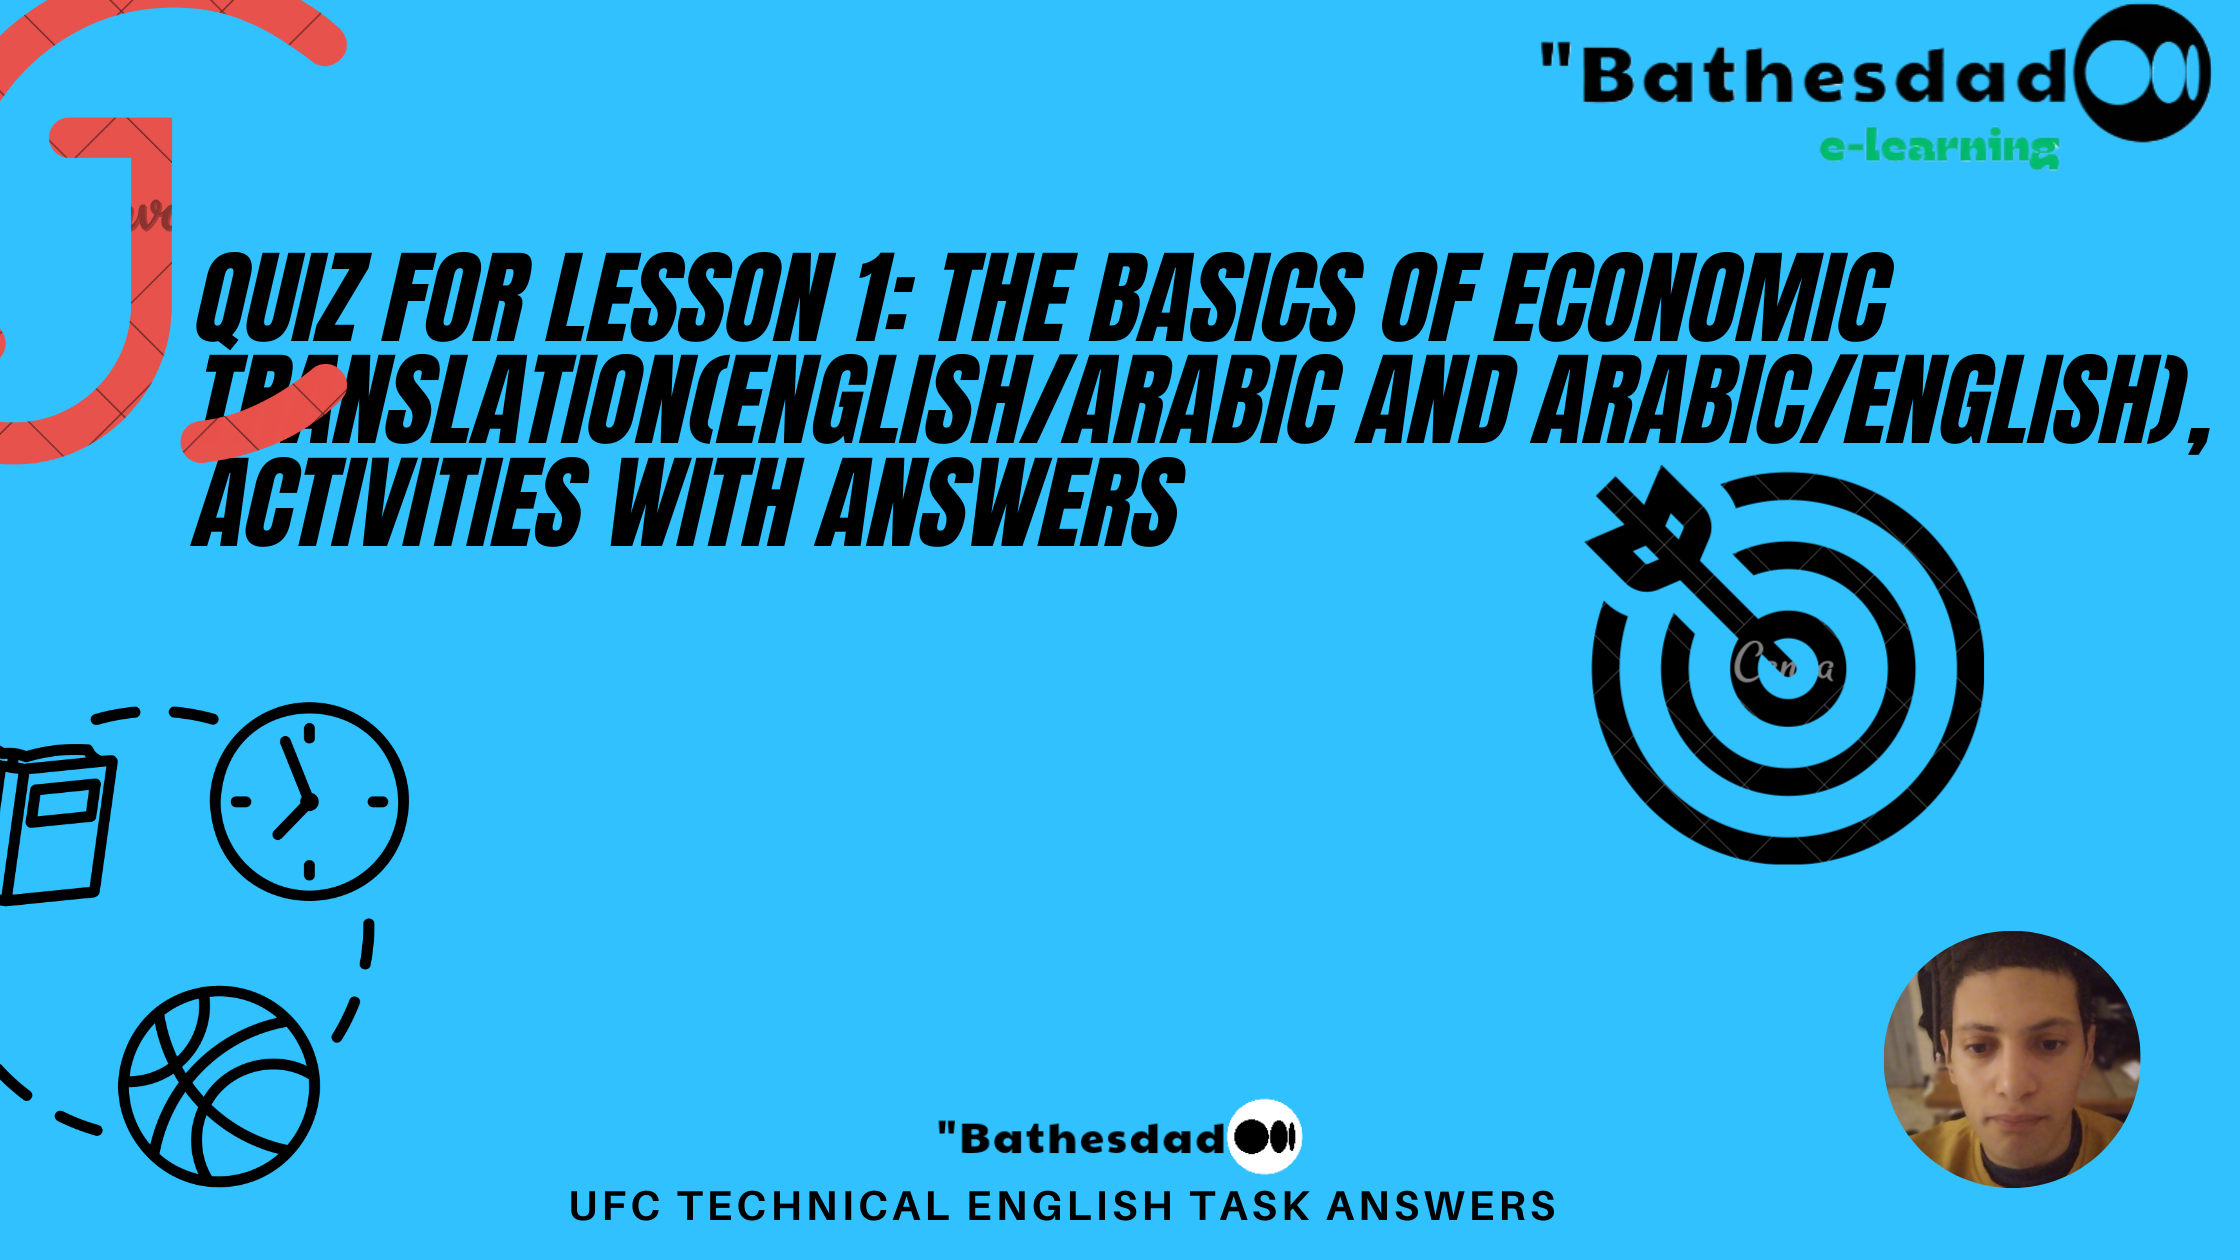 Quiz for Lesson 1: The Basics of Economic Translation(English/Arabic and Arabic/English), activities with answers